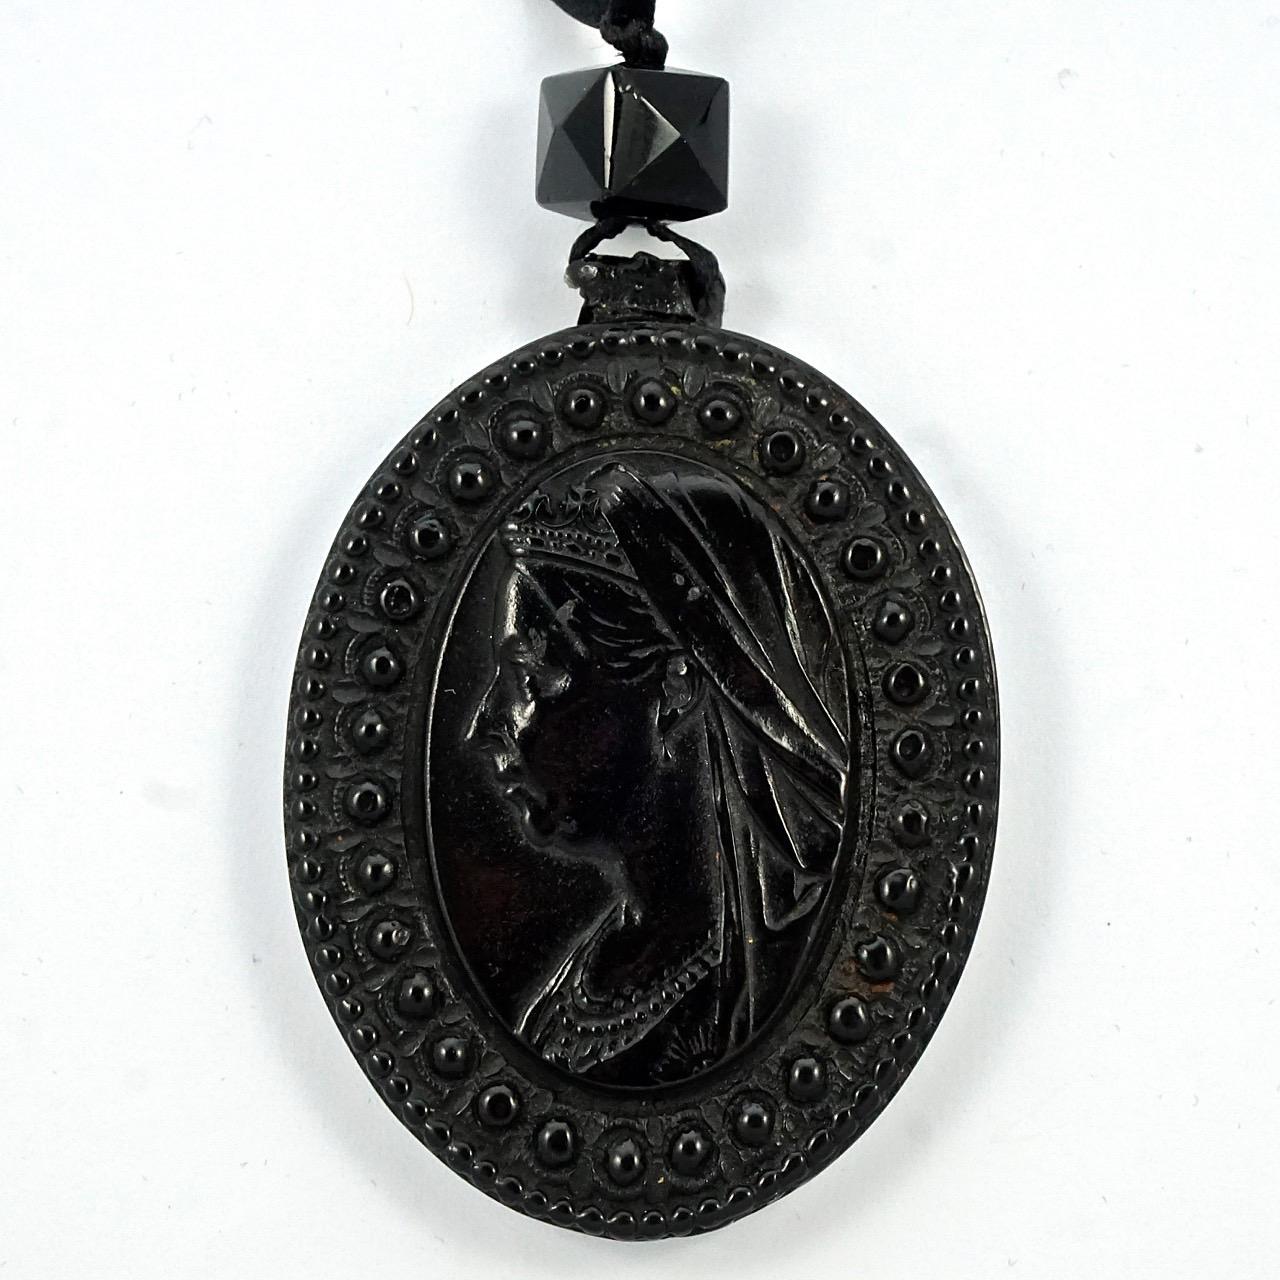 Antique Victorian large faux jet moulded pendant, hung on black ribbon with a pinchbeck dog clip. On the front is a profile of Queen Victoria in relief with a decorative edging, and the back is inscribed 'May Saints Embrace Thee with a Love like